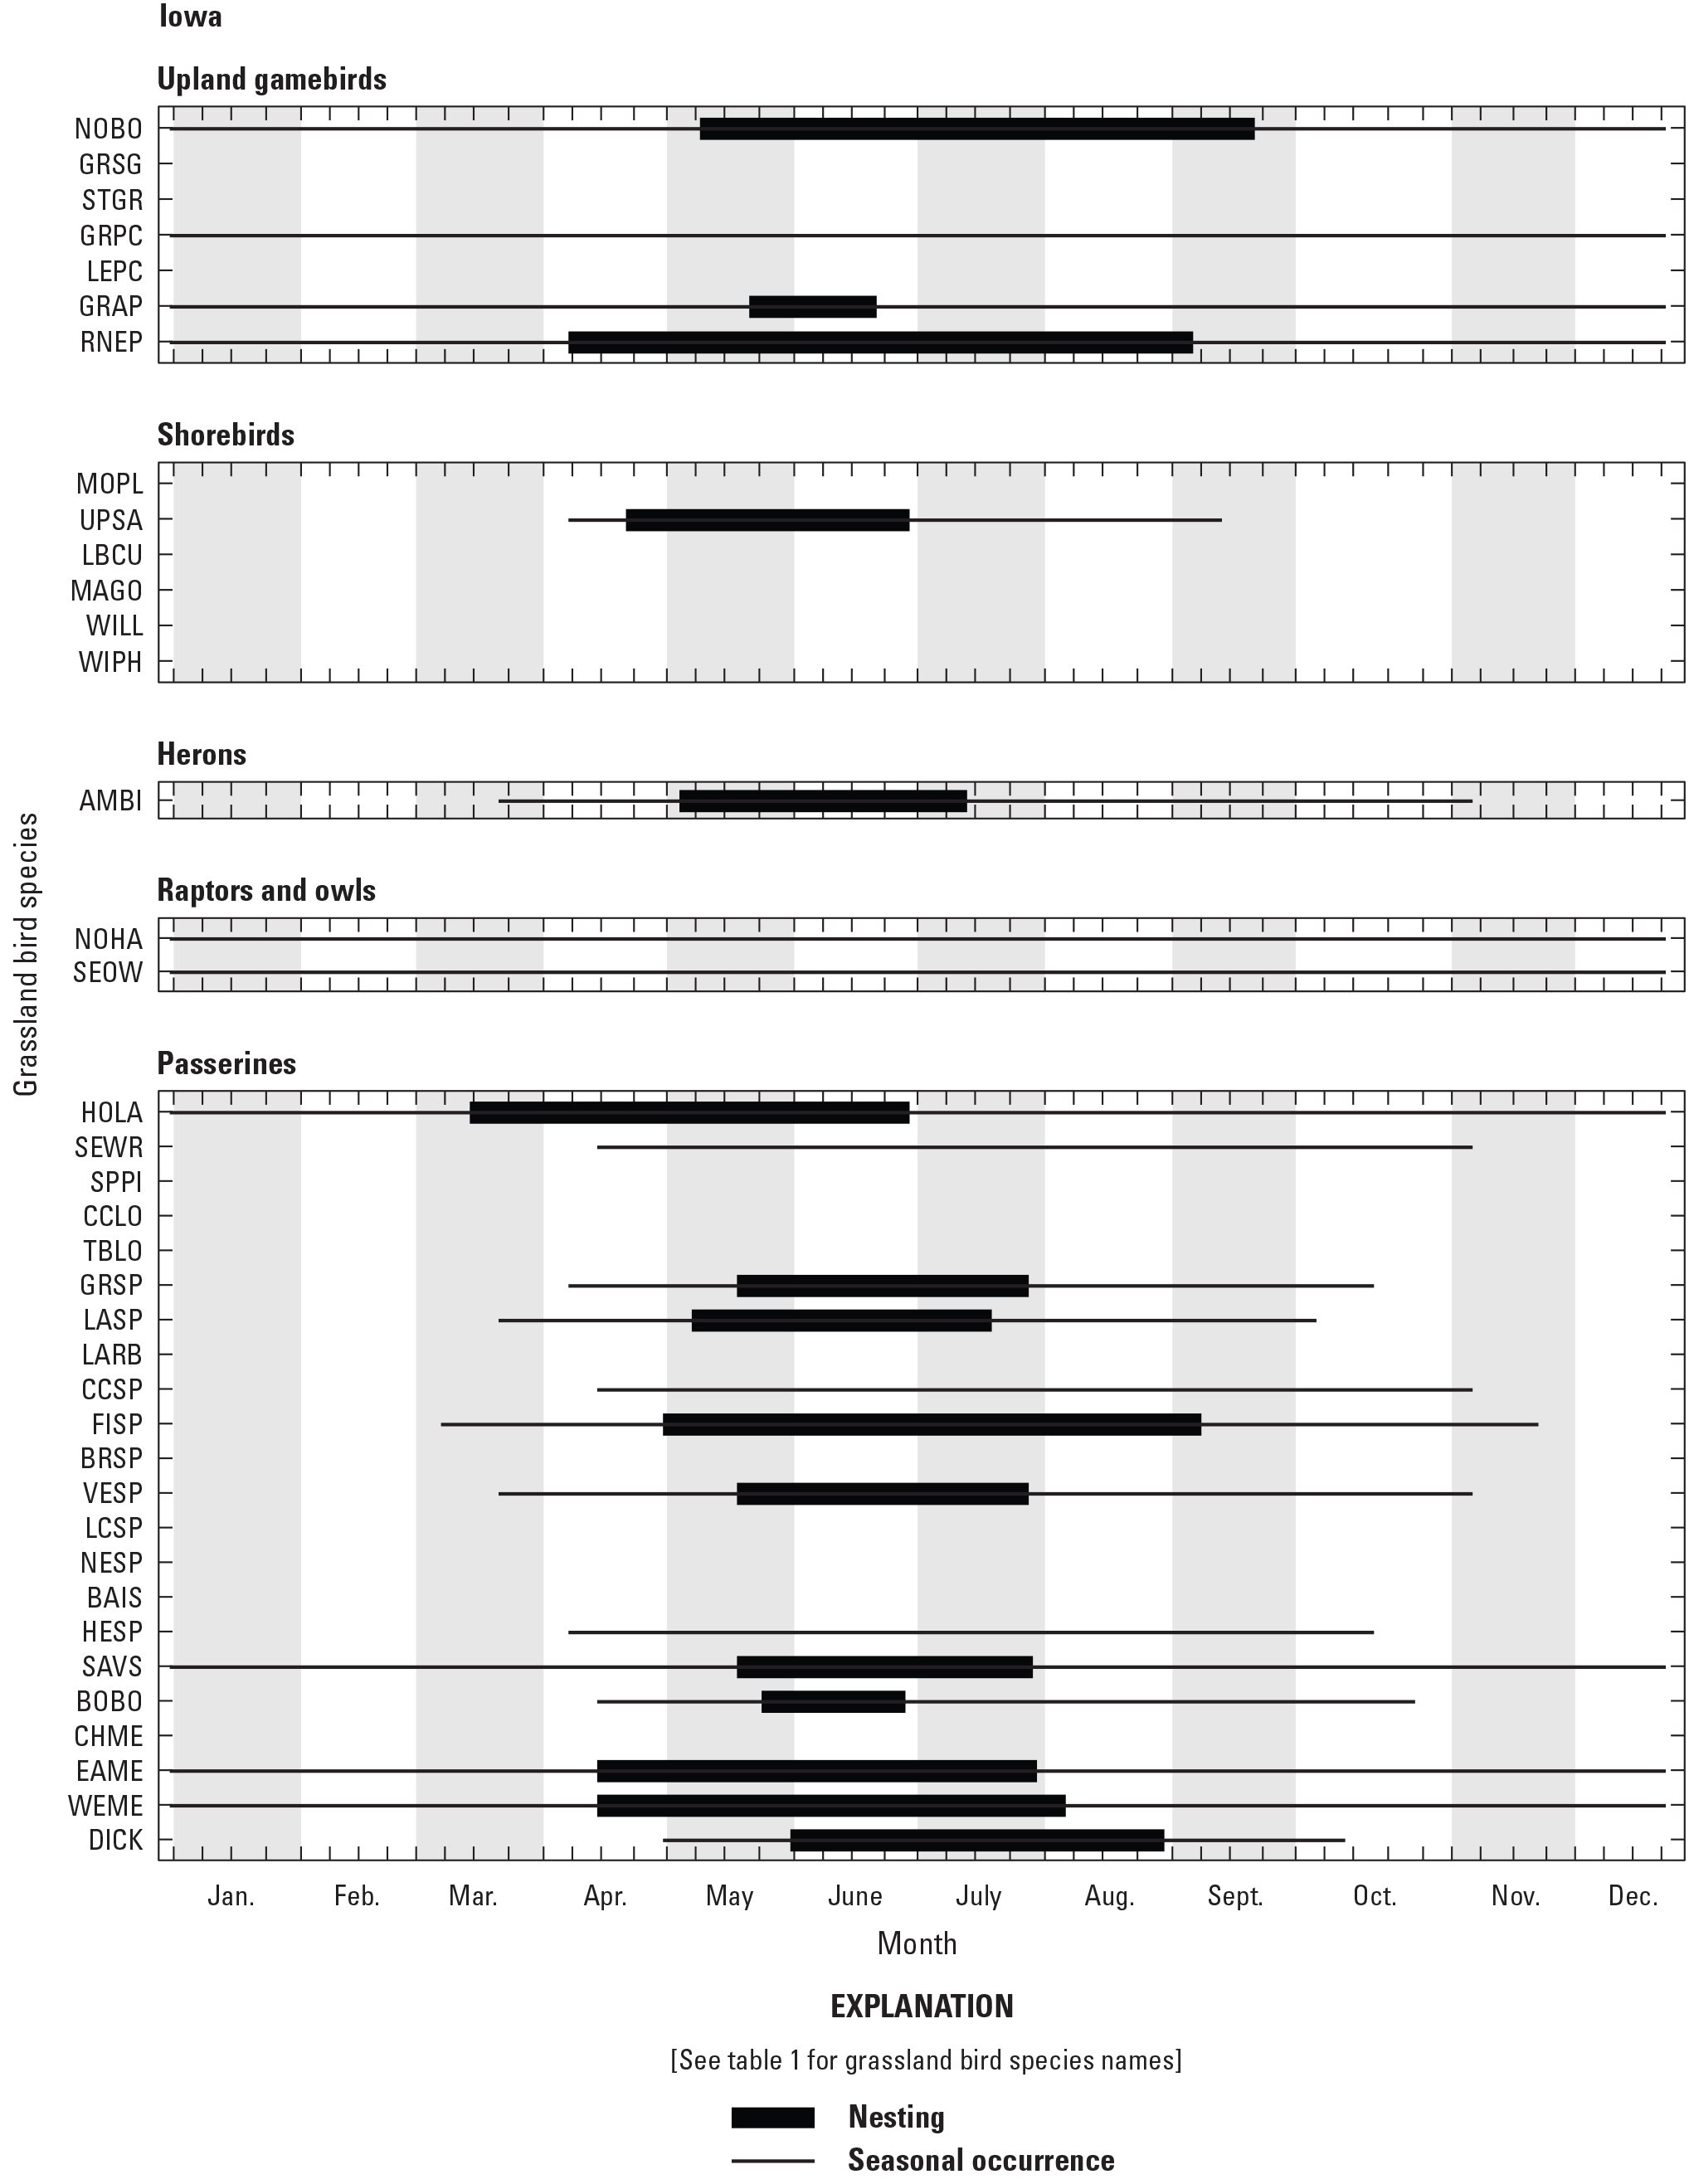 Figure showing seasonal occurrence and nesting phenology for 38 grassland bird species
               in Iowa, United States.